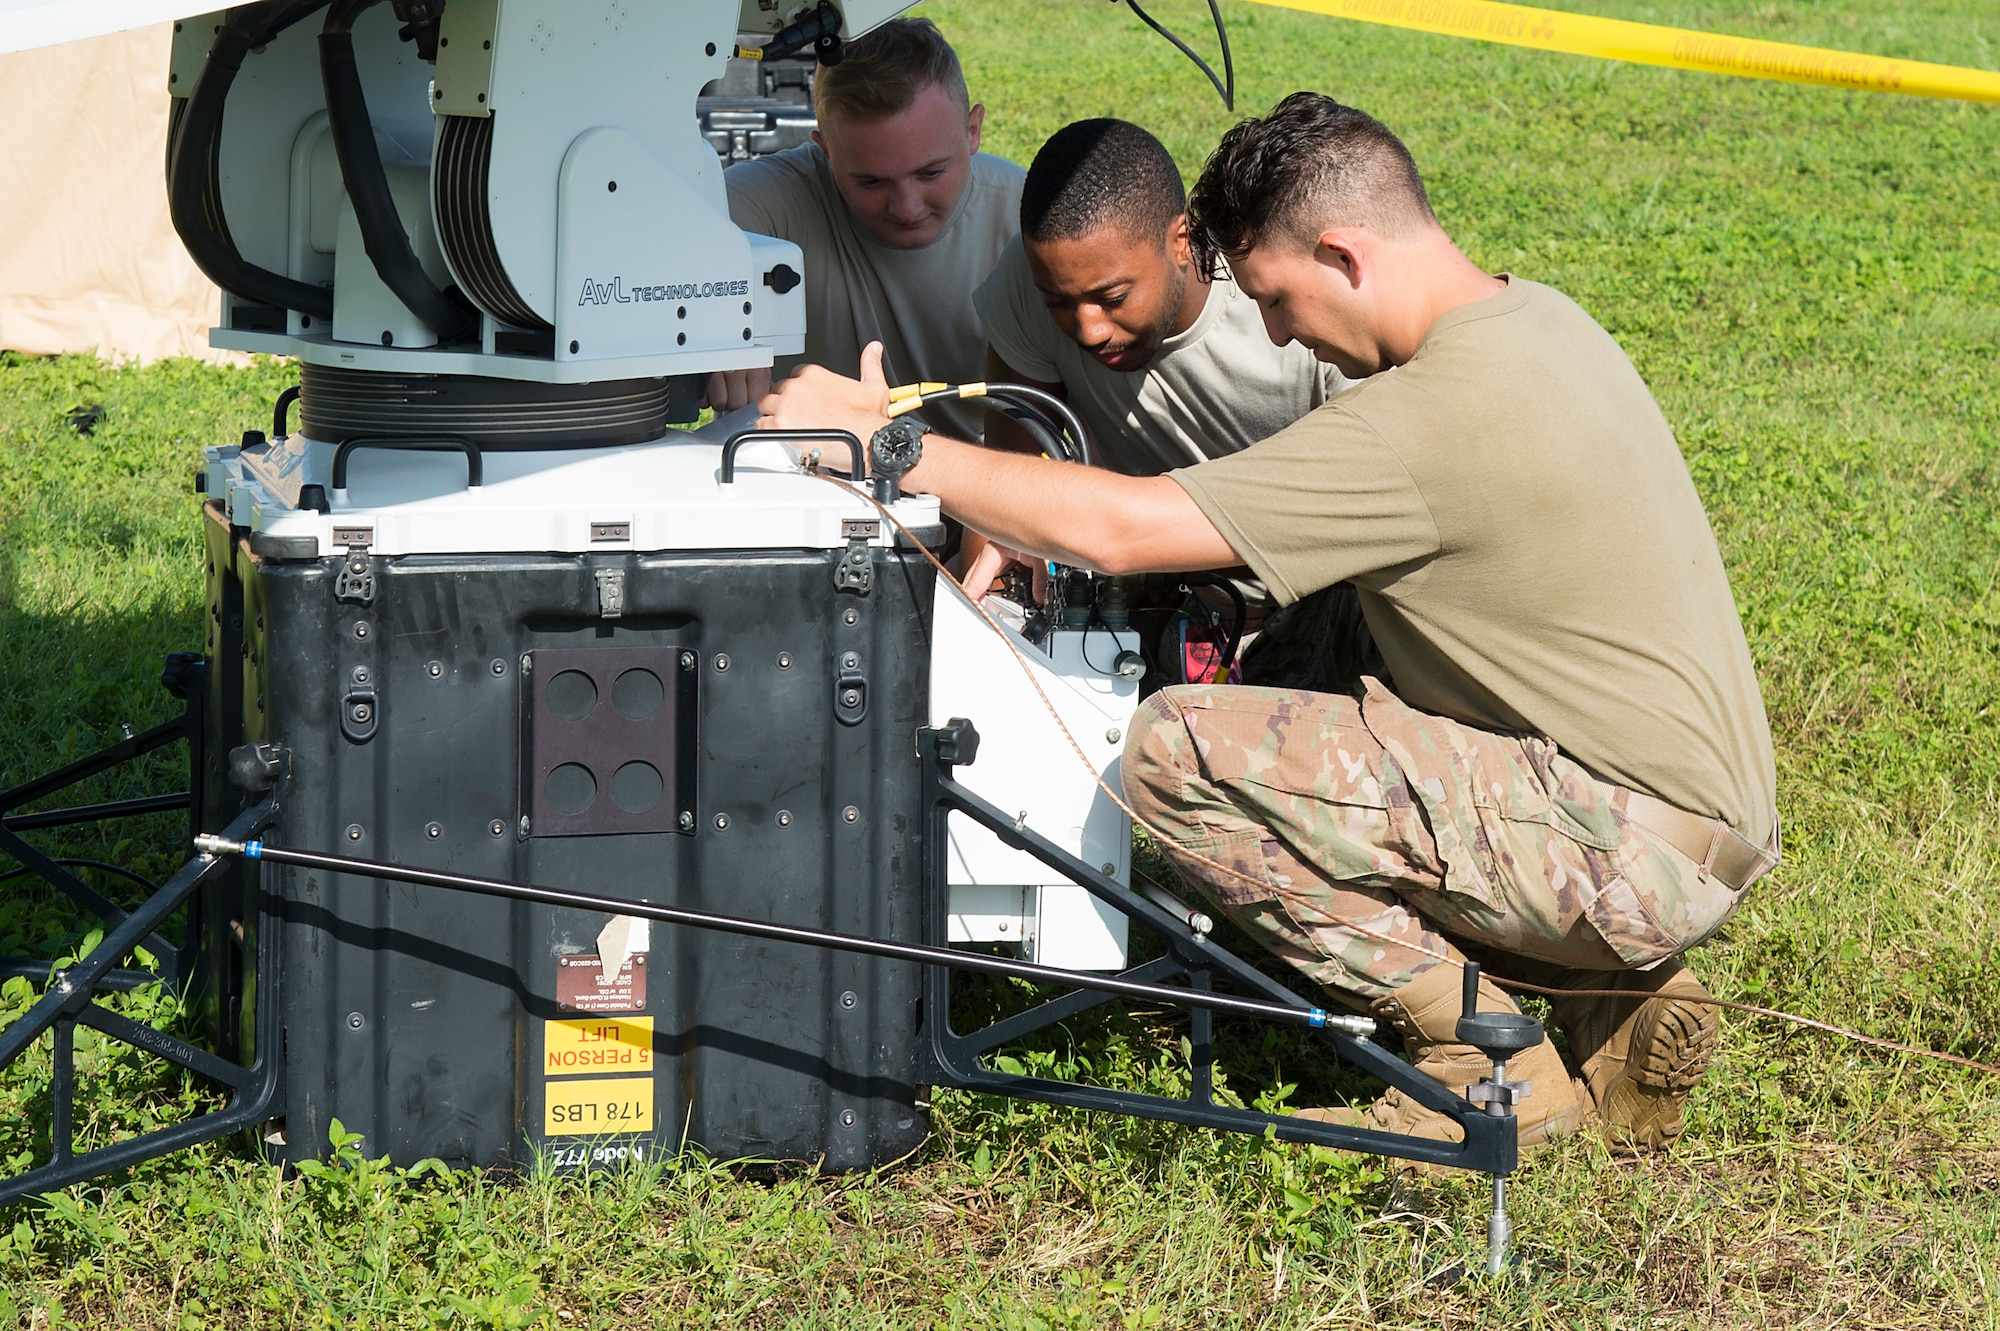 U.S. Air Force Airman 1st Class Caleb Shumaker, Airman 1st Class Andree Dixson and Airman 1st Class Andrew Knudsvig, 27th Special Operations Communication Squadron, expeditionary cyber operations technicians, test a satellite communications system, July 18, 2019, at MacDill Air Force Base, Fla.